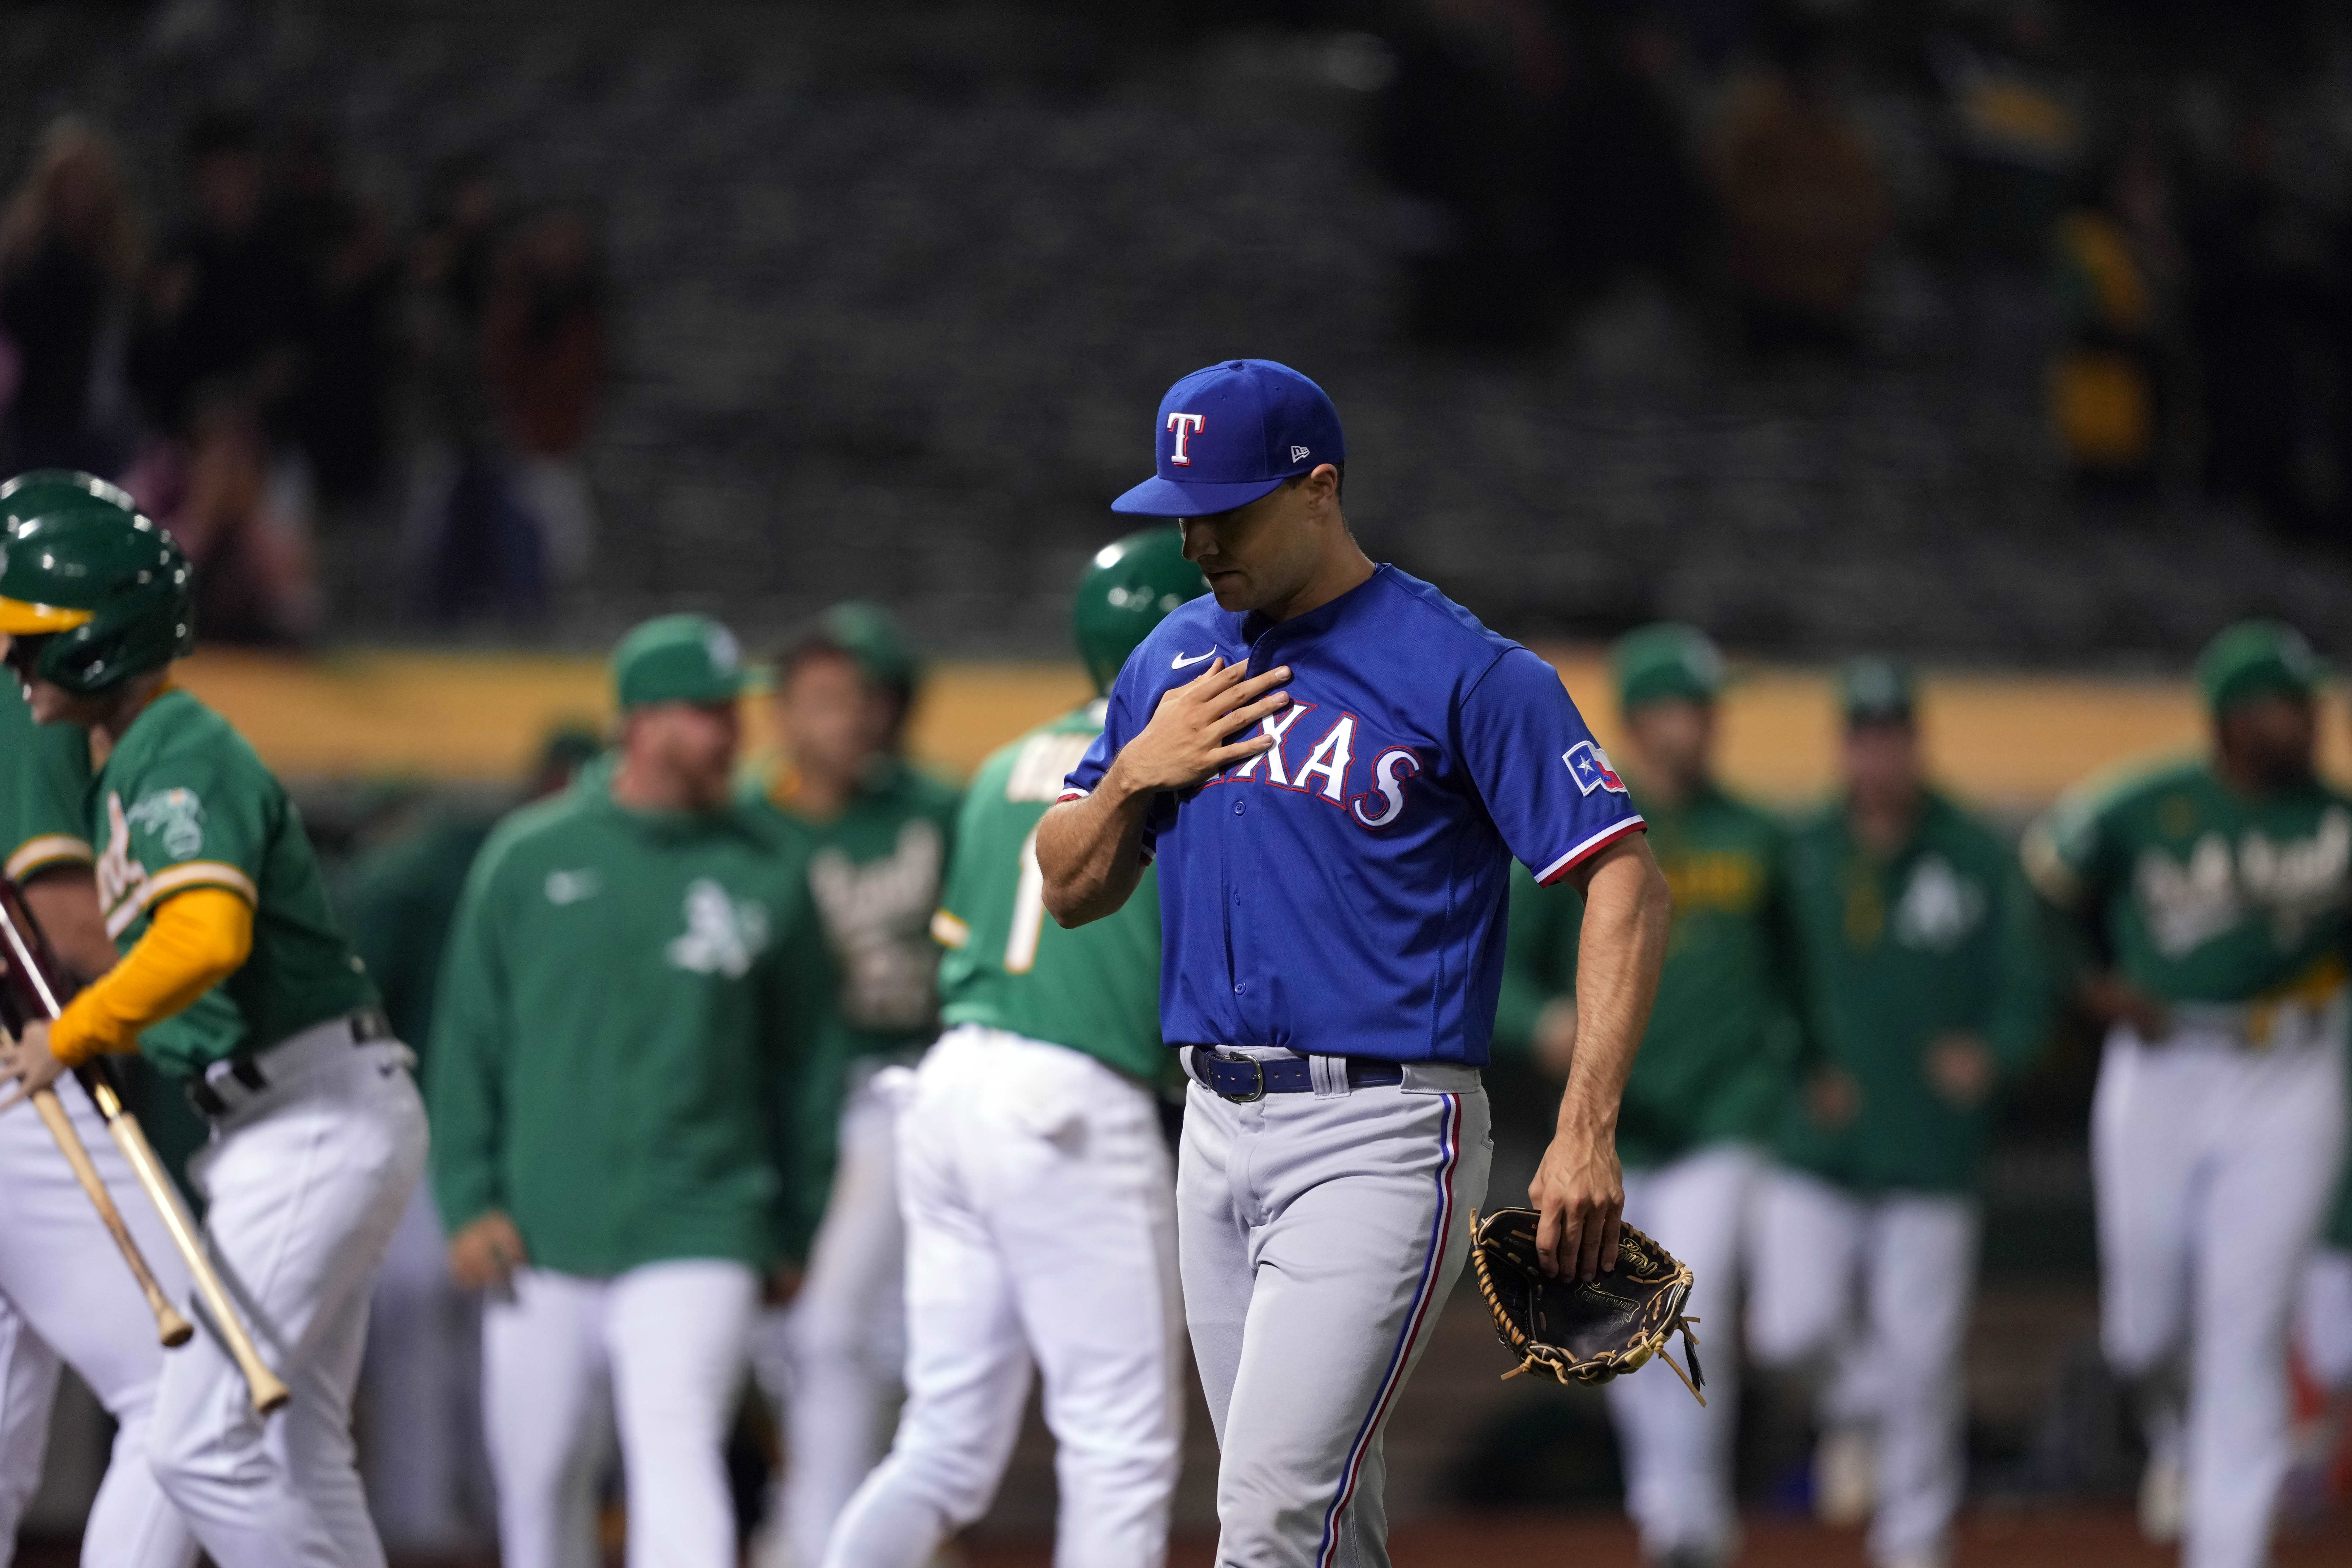 Texas Rangers Shouldn't Add Any More Major Offense: Keep Economic